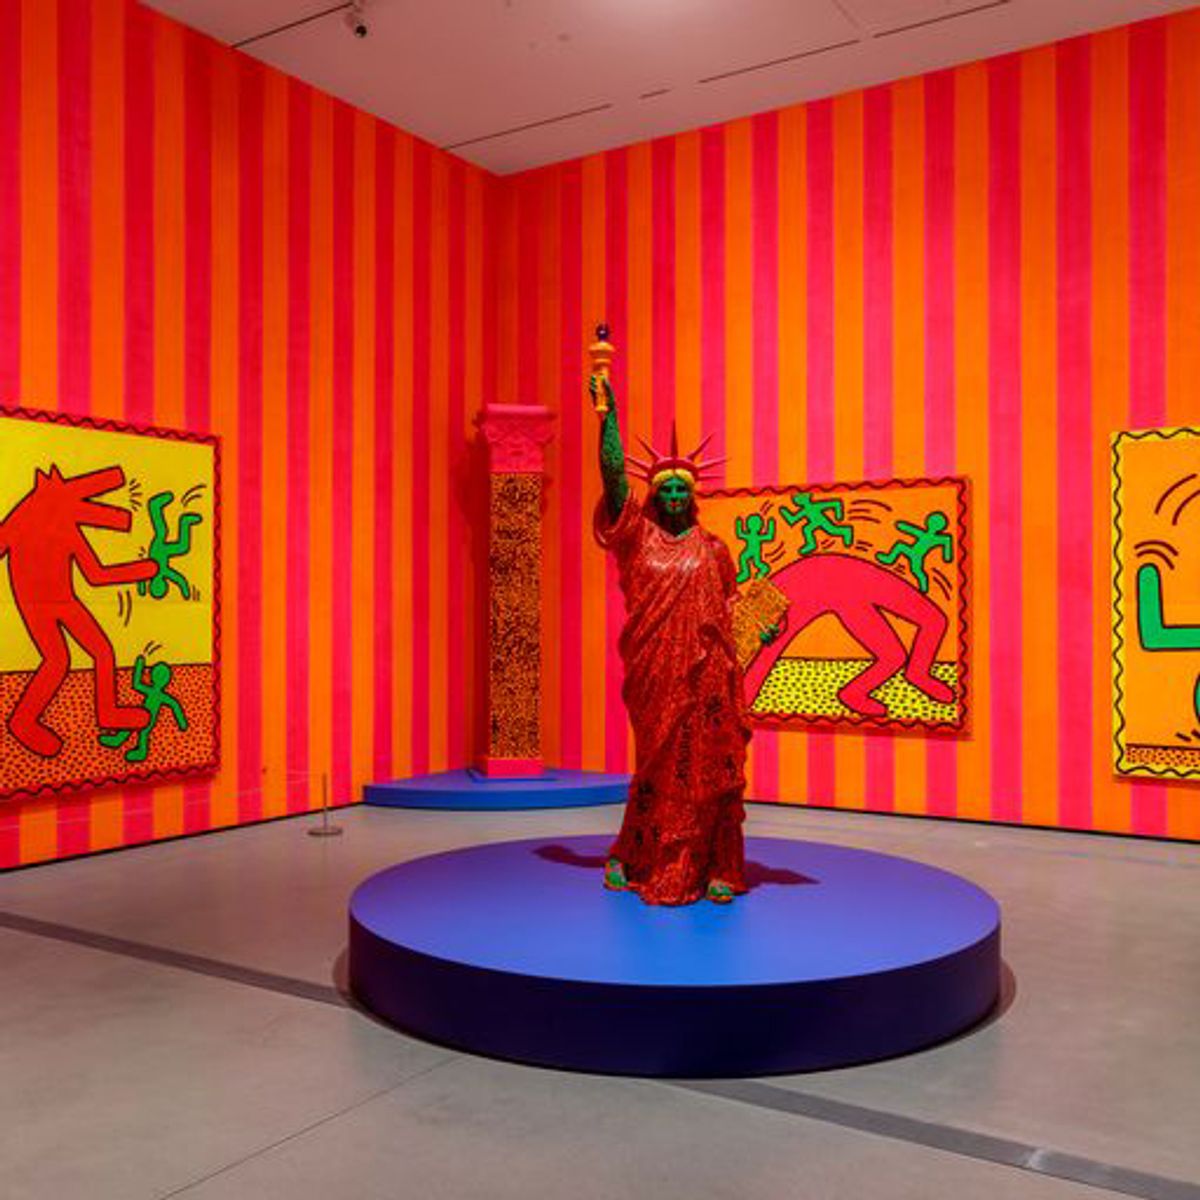 Installation view of Keith Haring: Art Is for Everybody exhibition at The Broad, Los Angeles, May 27, 2023 – October 8, 2023. 

Photo: Joshua White/JWPictures.com, courtesy of The Broad